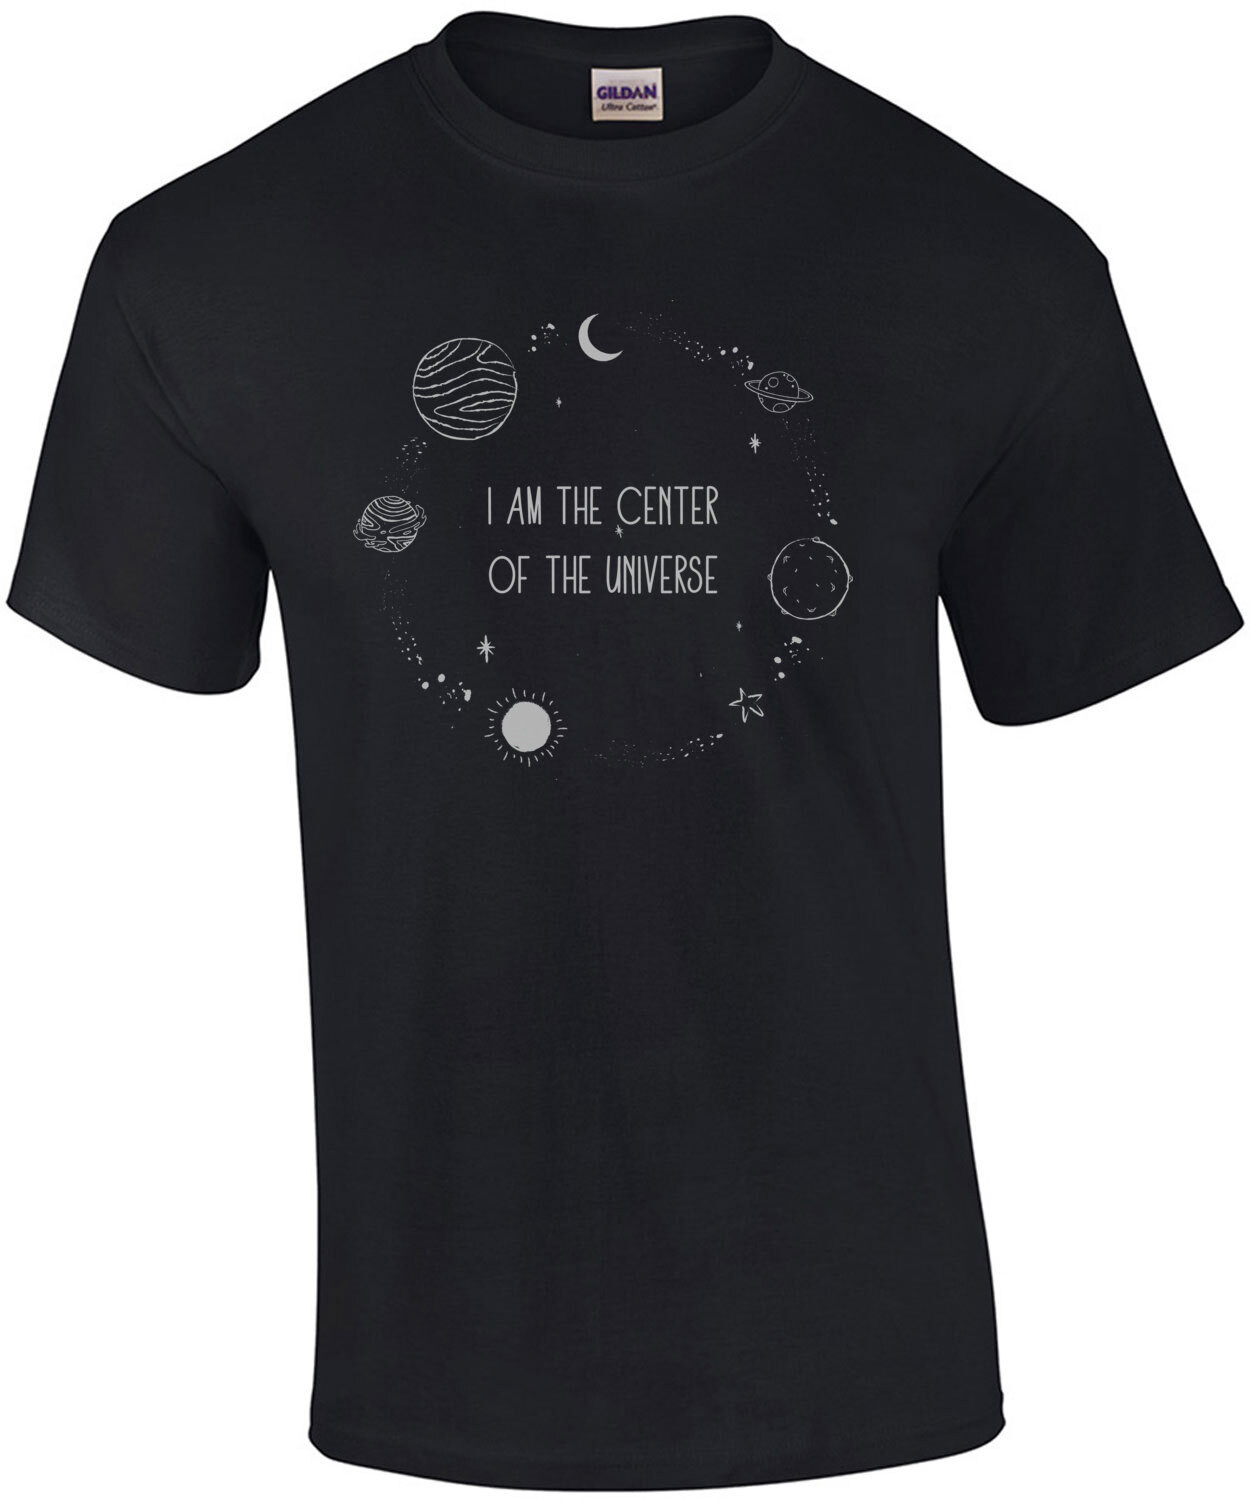 I am the center of the universe - sarcastic t-shirt